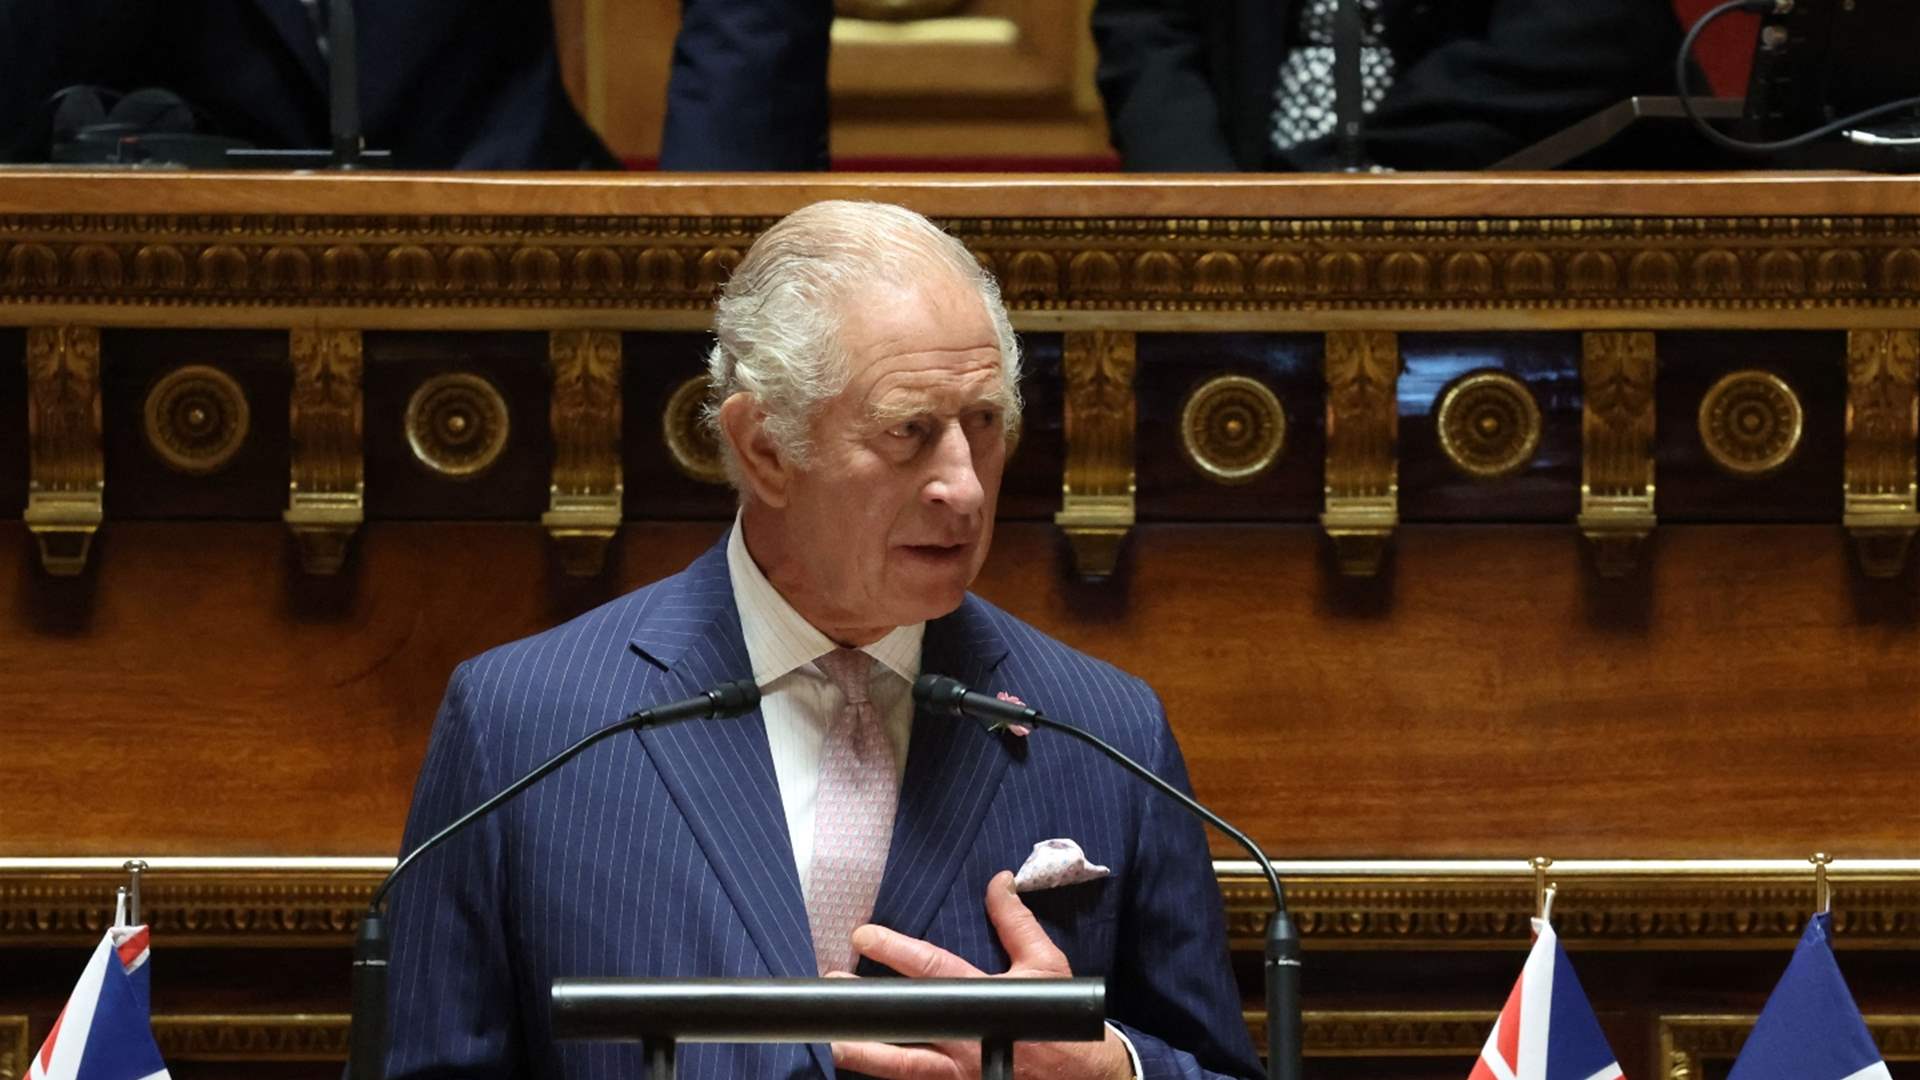 King Charles III calls for new climate agreement with France 